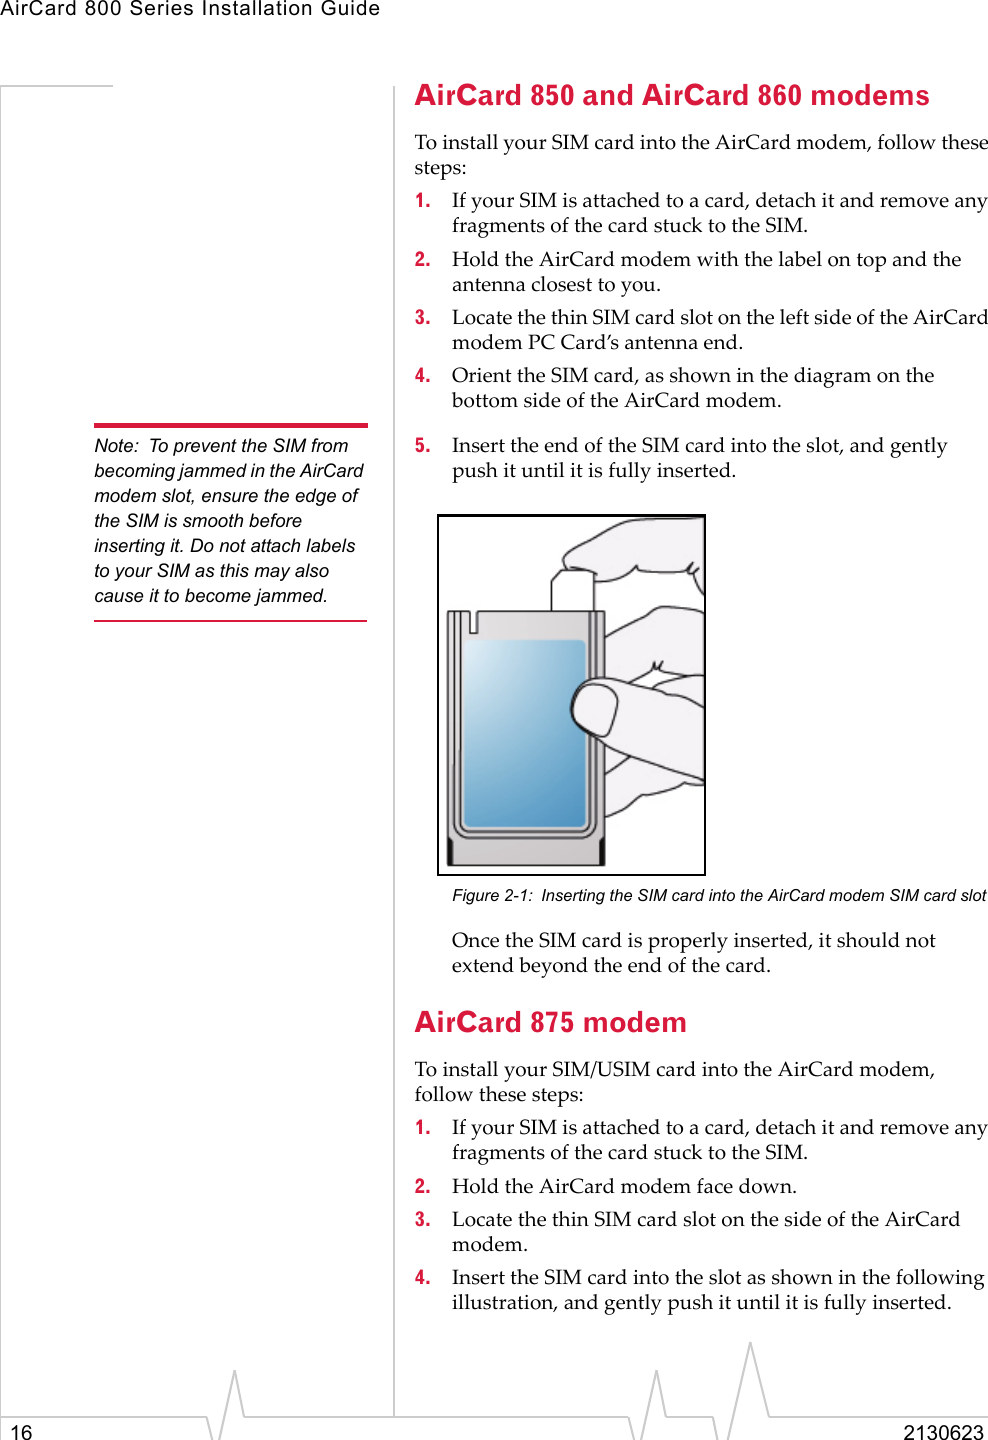 AirCard 800 Series Installation Guide16 2130623AirCard 850 and AirCard 860 modemsTo install your SIM card into the AirCard modem, follow these steps:1. If your SIM is attached to a card, detach it and remove any fragments of the card stuck to the SIM.2. Hold the AirCard modem with the label on top and the antenna closest to you.3. Locate the thin SIM card slot on the left side of the AirCard modem PC Card’s antenna end.4. Orient the SIM card, as shown in the diagram on the bottom side of the AirCard modem.Note: To prevent the SIM from becoming jammed in the AirCard modem slot, ensure the edge of the SIM is smooth before inserting it. Do not attach labels to your SIM as this may also cause it to become jammed.5. Insert the end of the SIM card into the slot, and gently push it until it is fully inserted.Figure 2-1: Inserting the SIM card into the AirCard modem SIM card slotOnce the SIM card is properly inserted, it should not extend beyond the end of the card.AirCard 875 modemTo install your SIM/USIM card into the AirCard modem, follow these steps:1. If your SIM is attached to a card, detach it and remove any fragments of the card stuck to the SIM.2. Hold the AirCard modem face down.3. Locate the thin SIM card slot on the side of the AirCard modem.4. Insert the SIM card into the slot as shown in the following illustration, and gently push it until it is fully inserted.